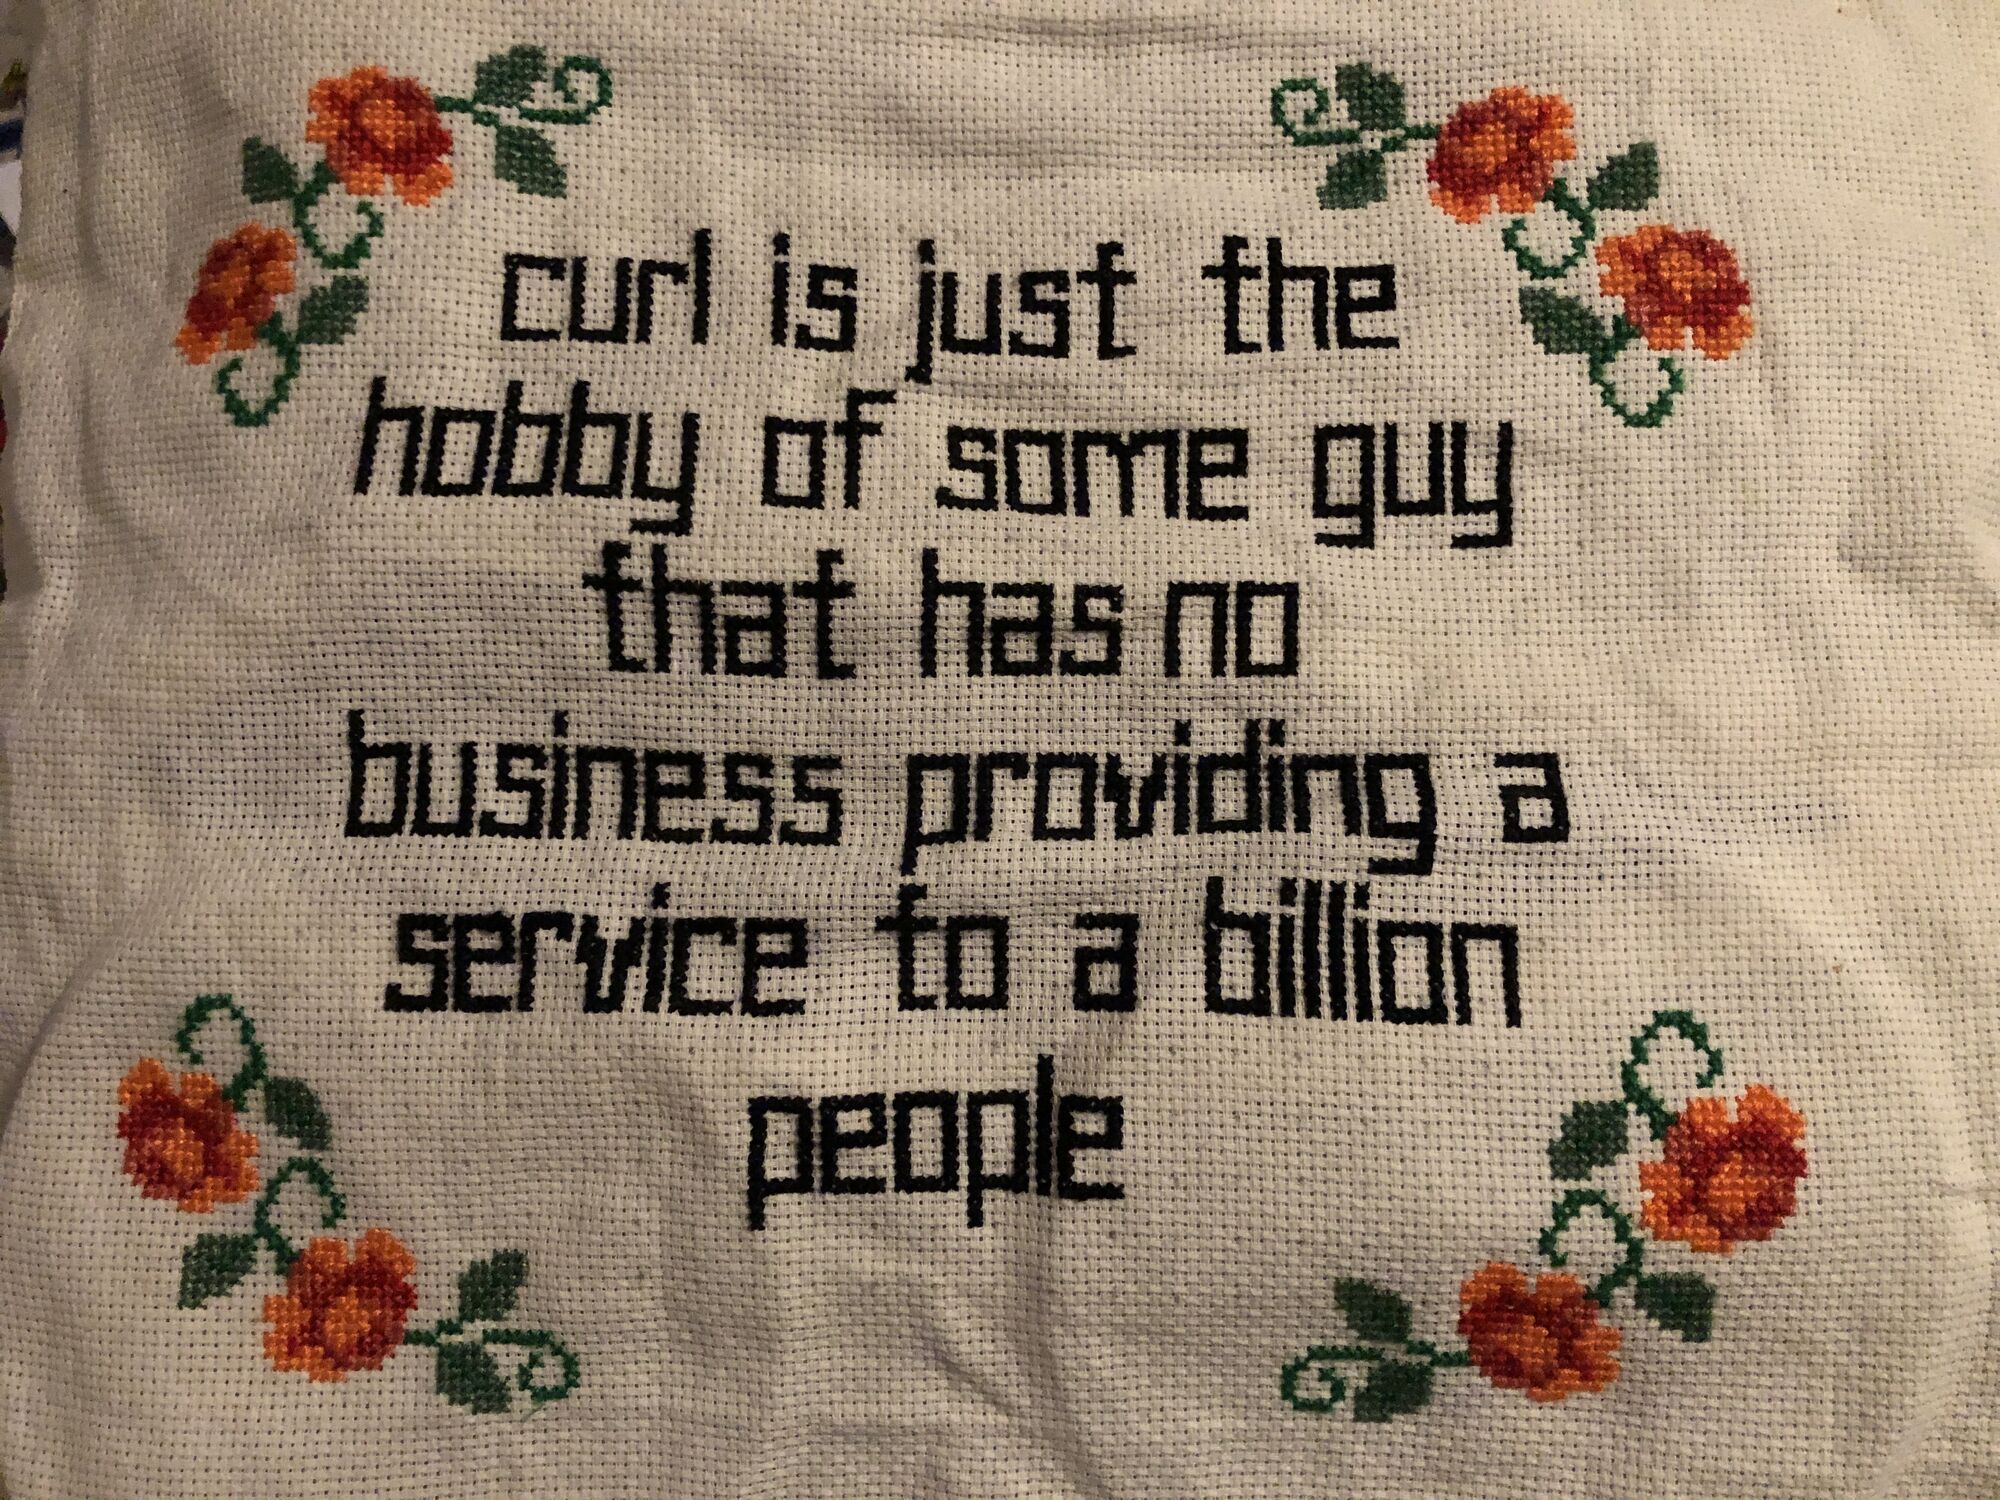 curl is just the hobby of some guy that has no business providing a service to a billion people